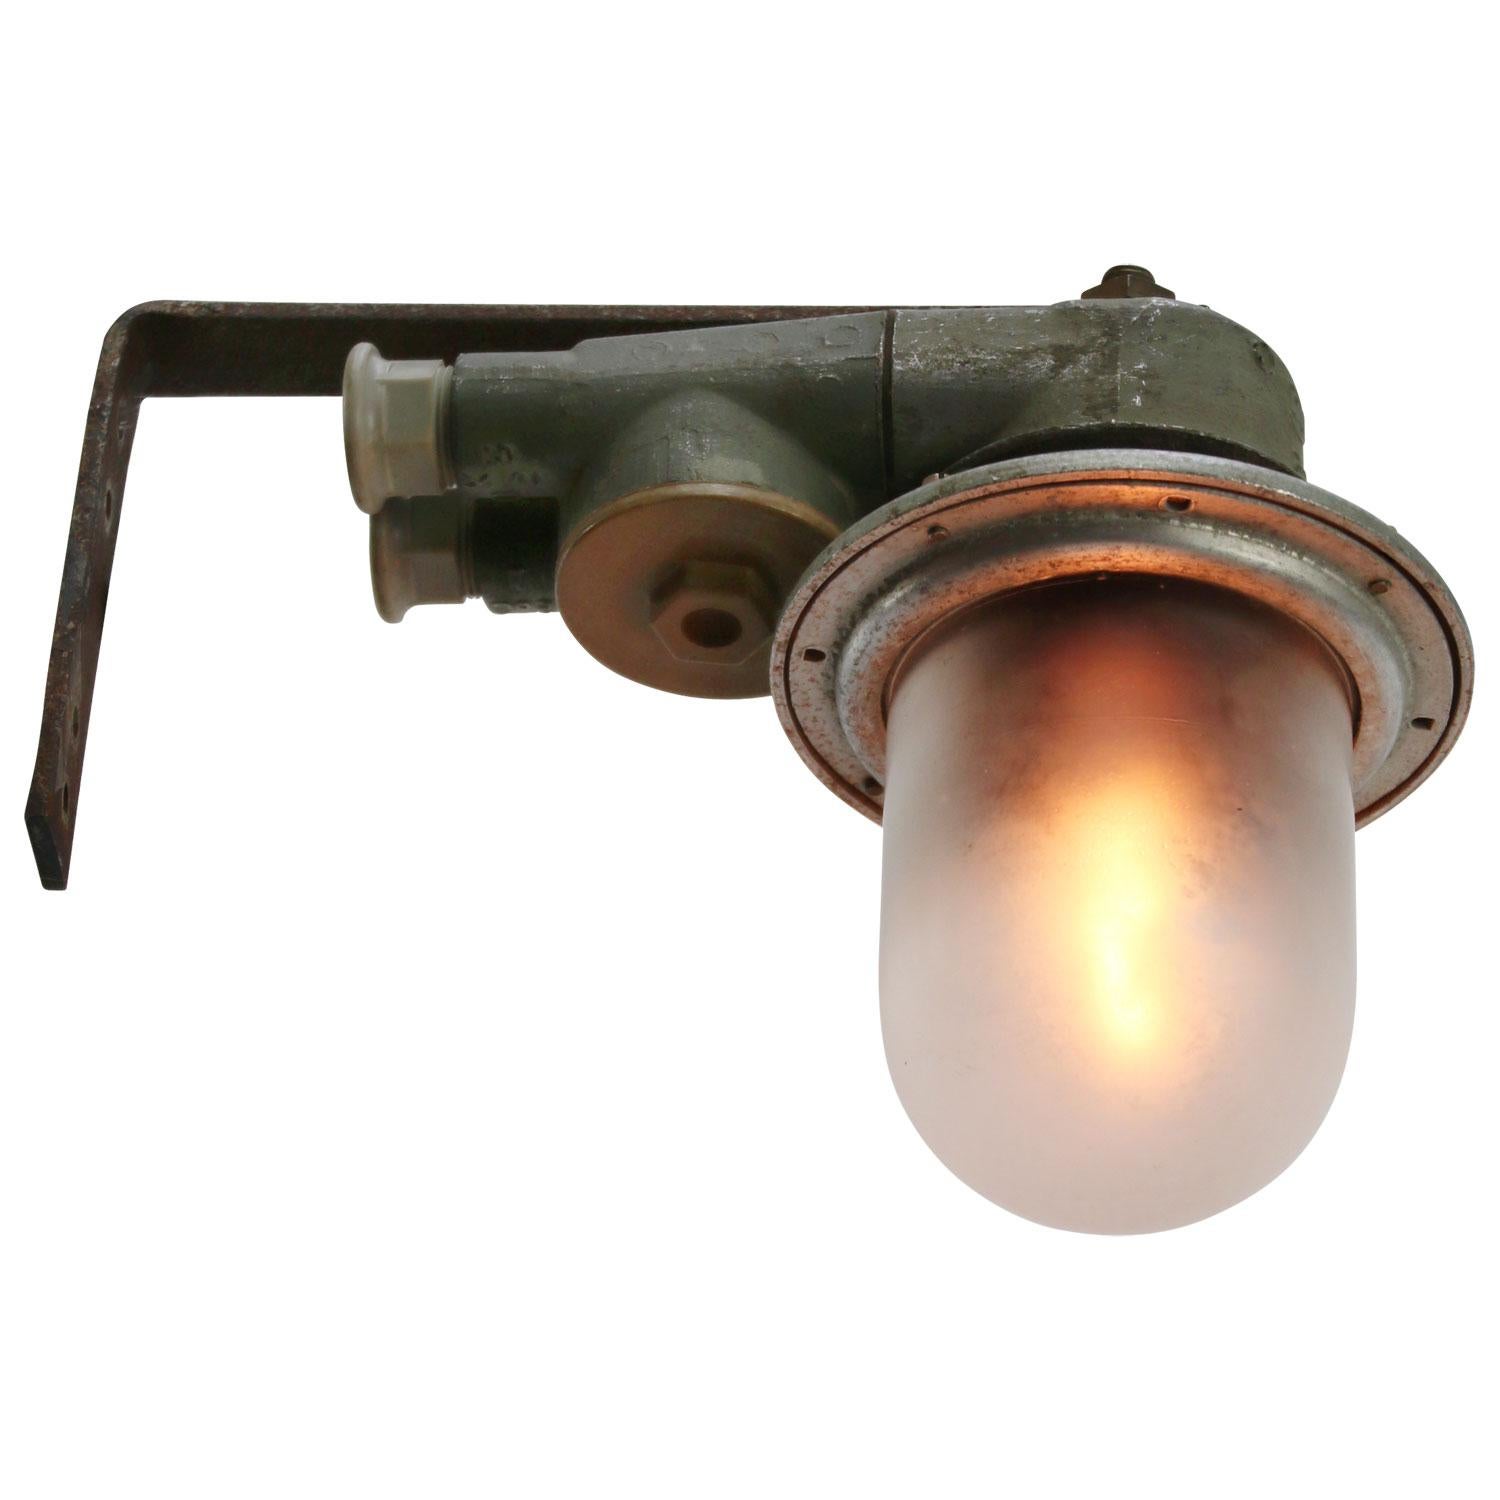 Cast aluminium Industrial wall light
frosted glass

cast iron wall piece: 4 holes to secure

Weight: 1.20 kg / 2.6 lb

Priced per individual item. All lamps have been made suitable by international standards for incandescent light bulbs,